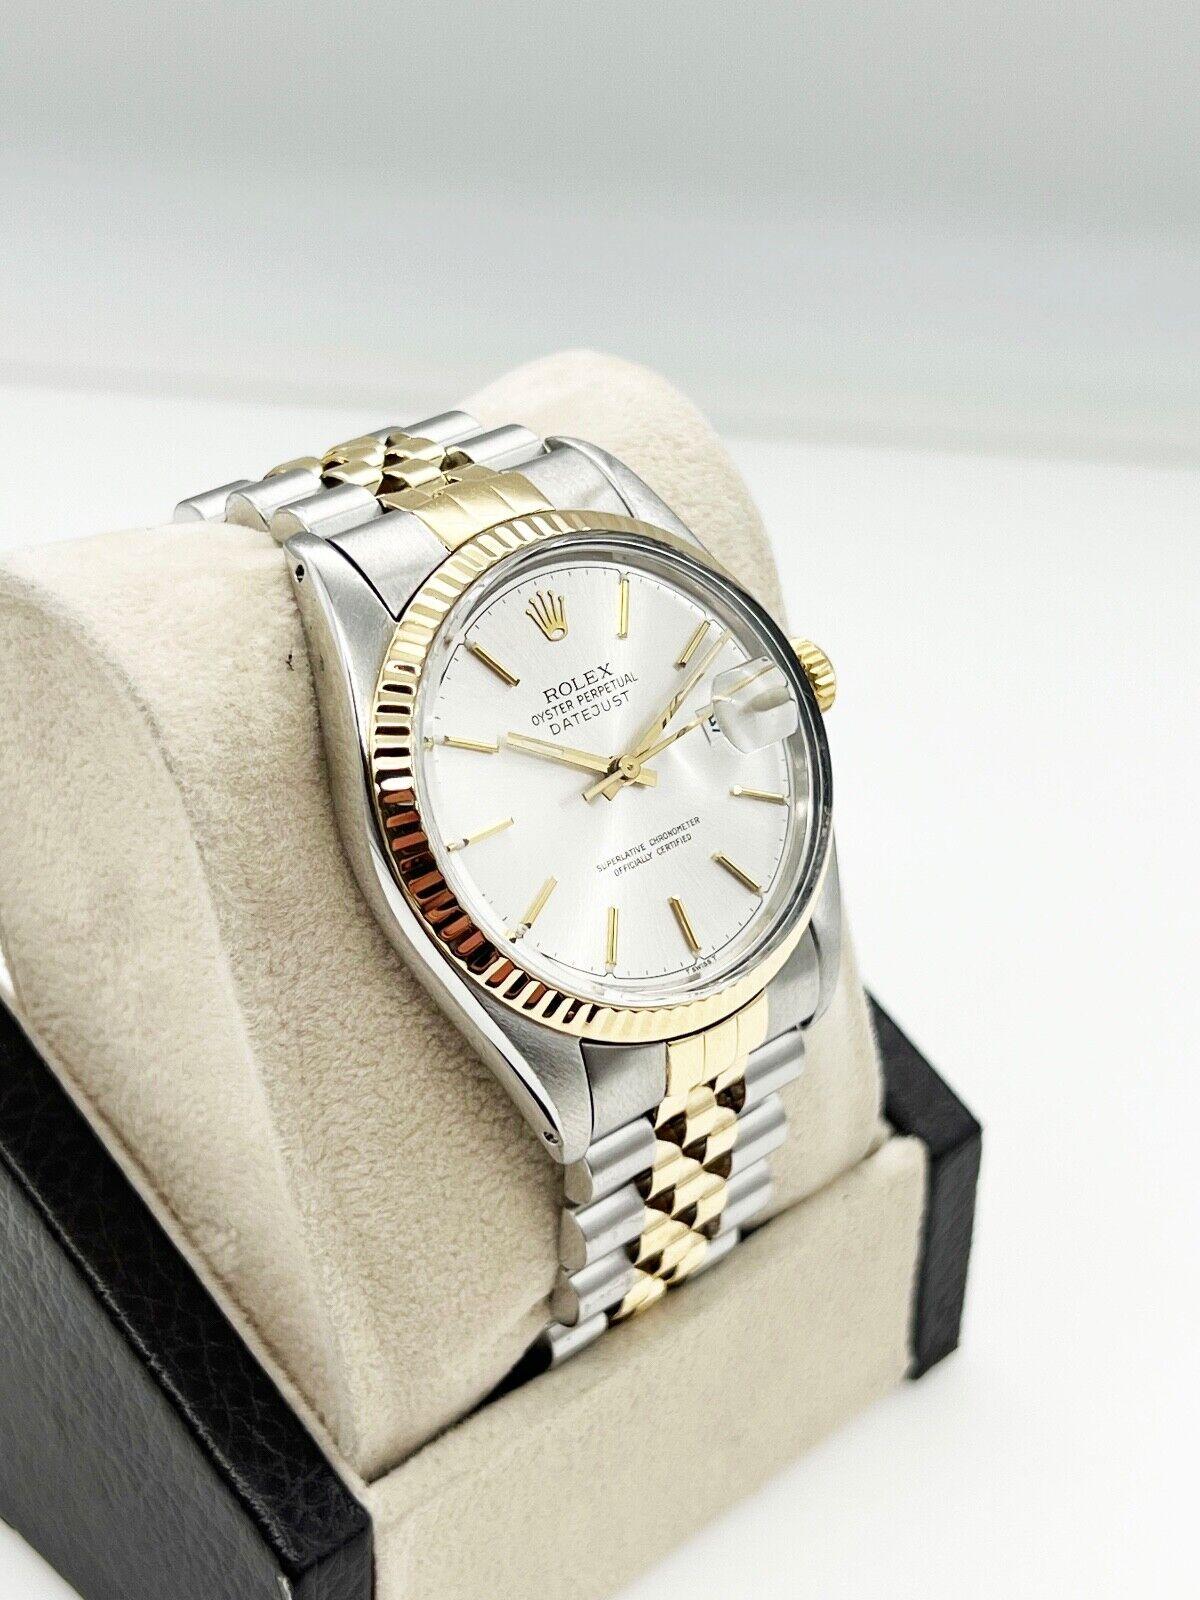 Rolex Datejust 16013 Silver Dial 18K Yellow Gold Stainless Steel In Good Condition For Sale In San Diego, CA